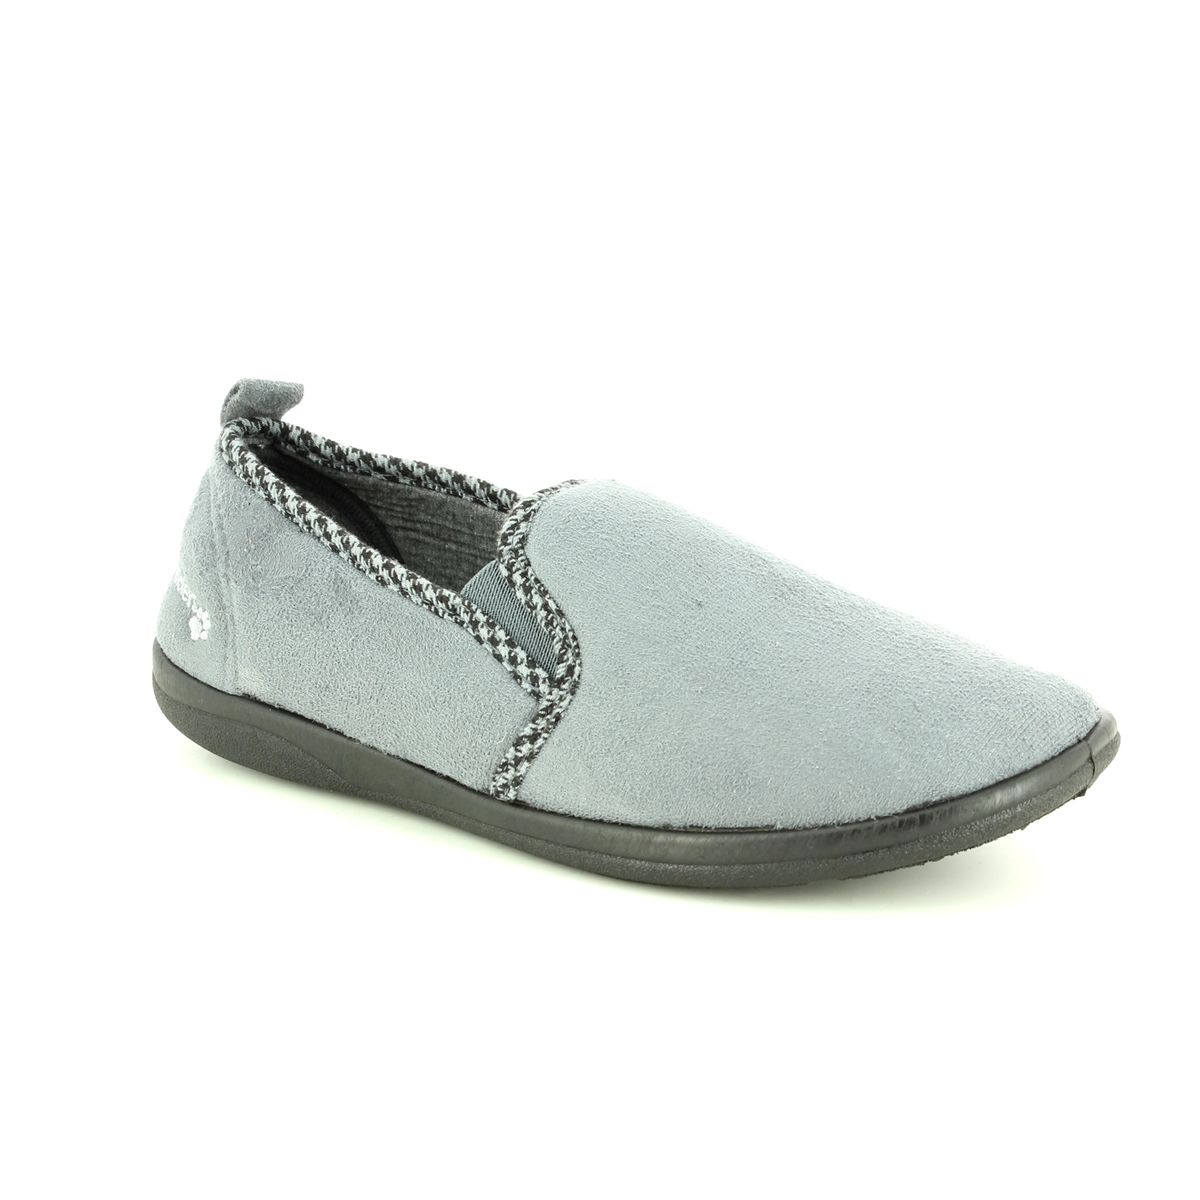 Padders Lewis G Fit Grey Mens slippers 470-99 in a Plain Microsuede in Size 11